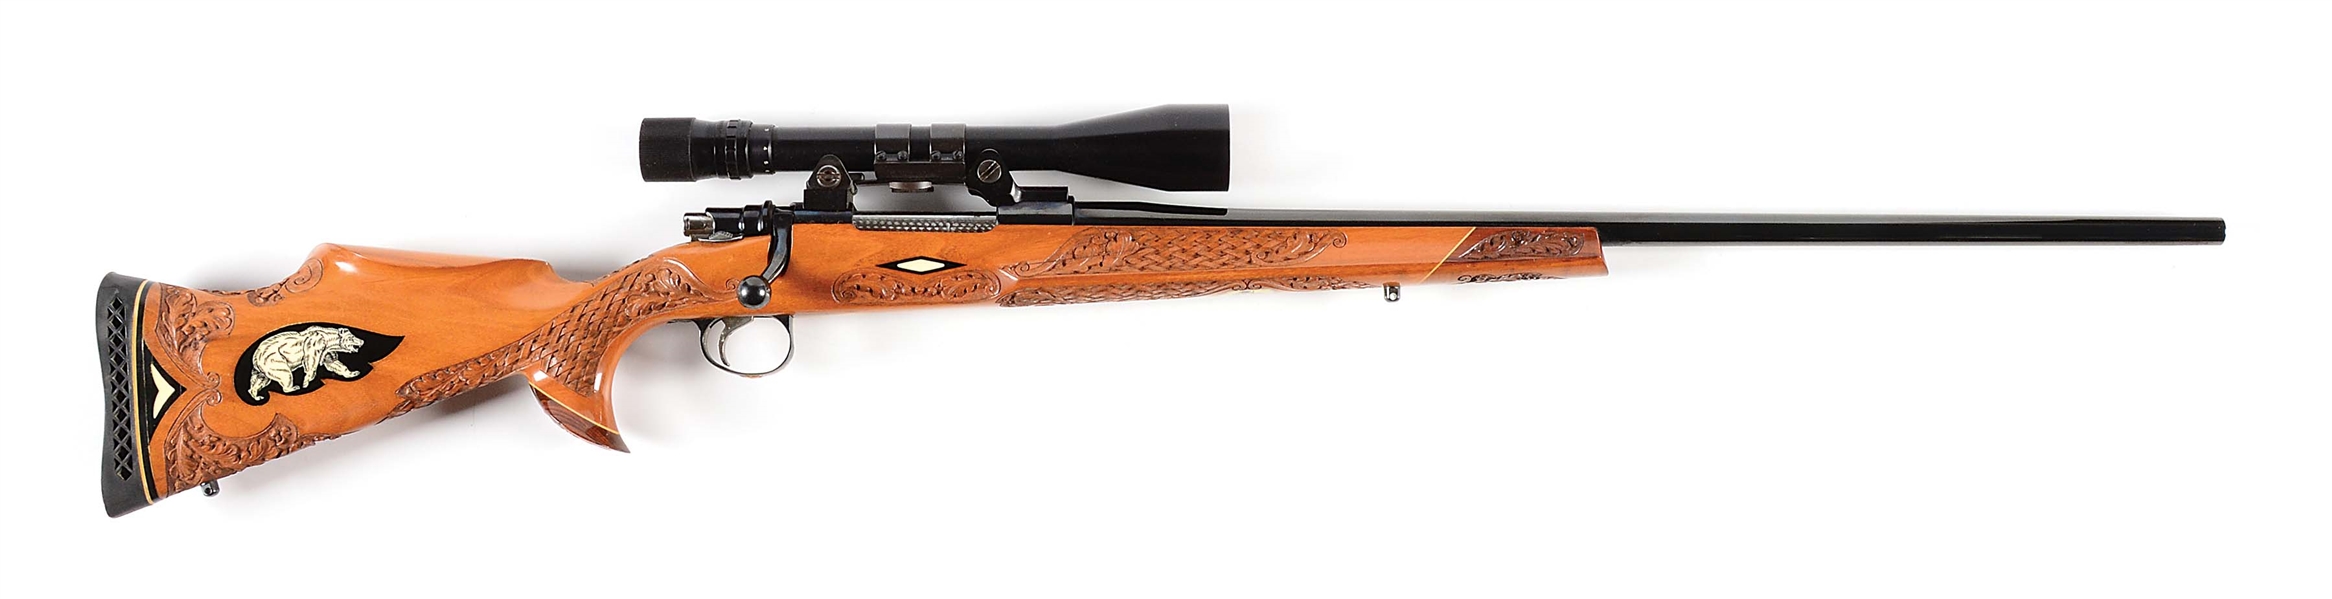 (C) WINSLOW ARMS CO. ROYAL GRADE .300 WEATHERBY MAGNUM BOLT ACTION RIFLE ITH BALVAR 8A SCOPE.